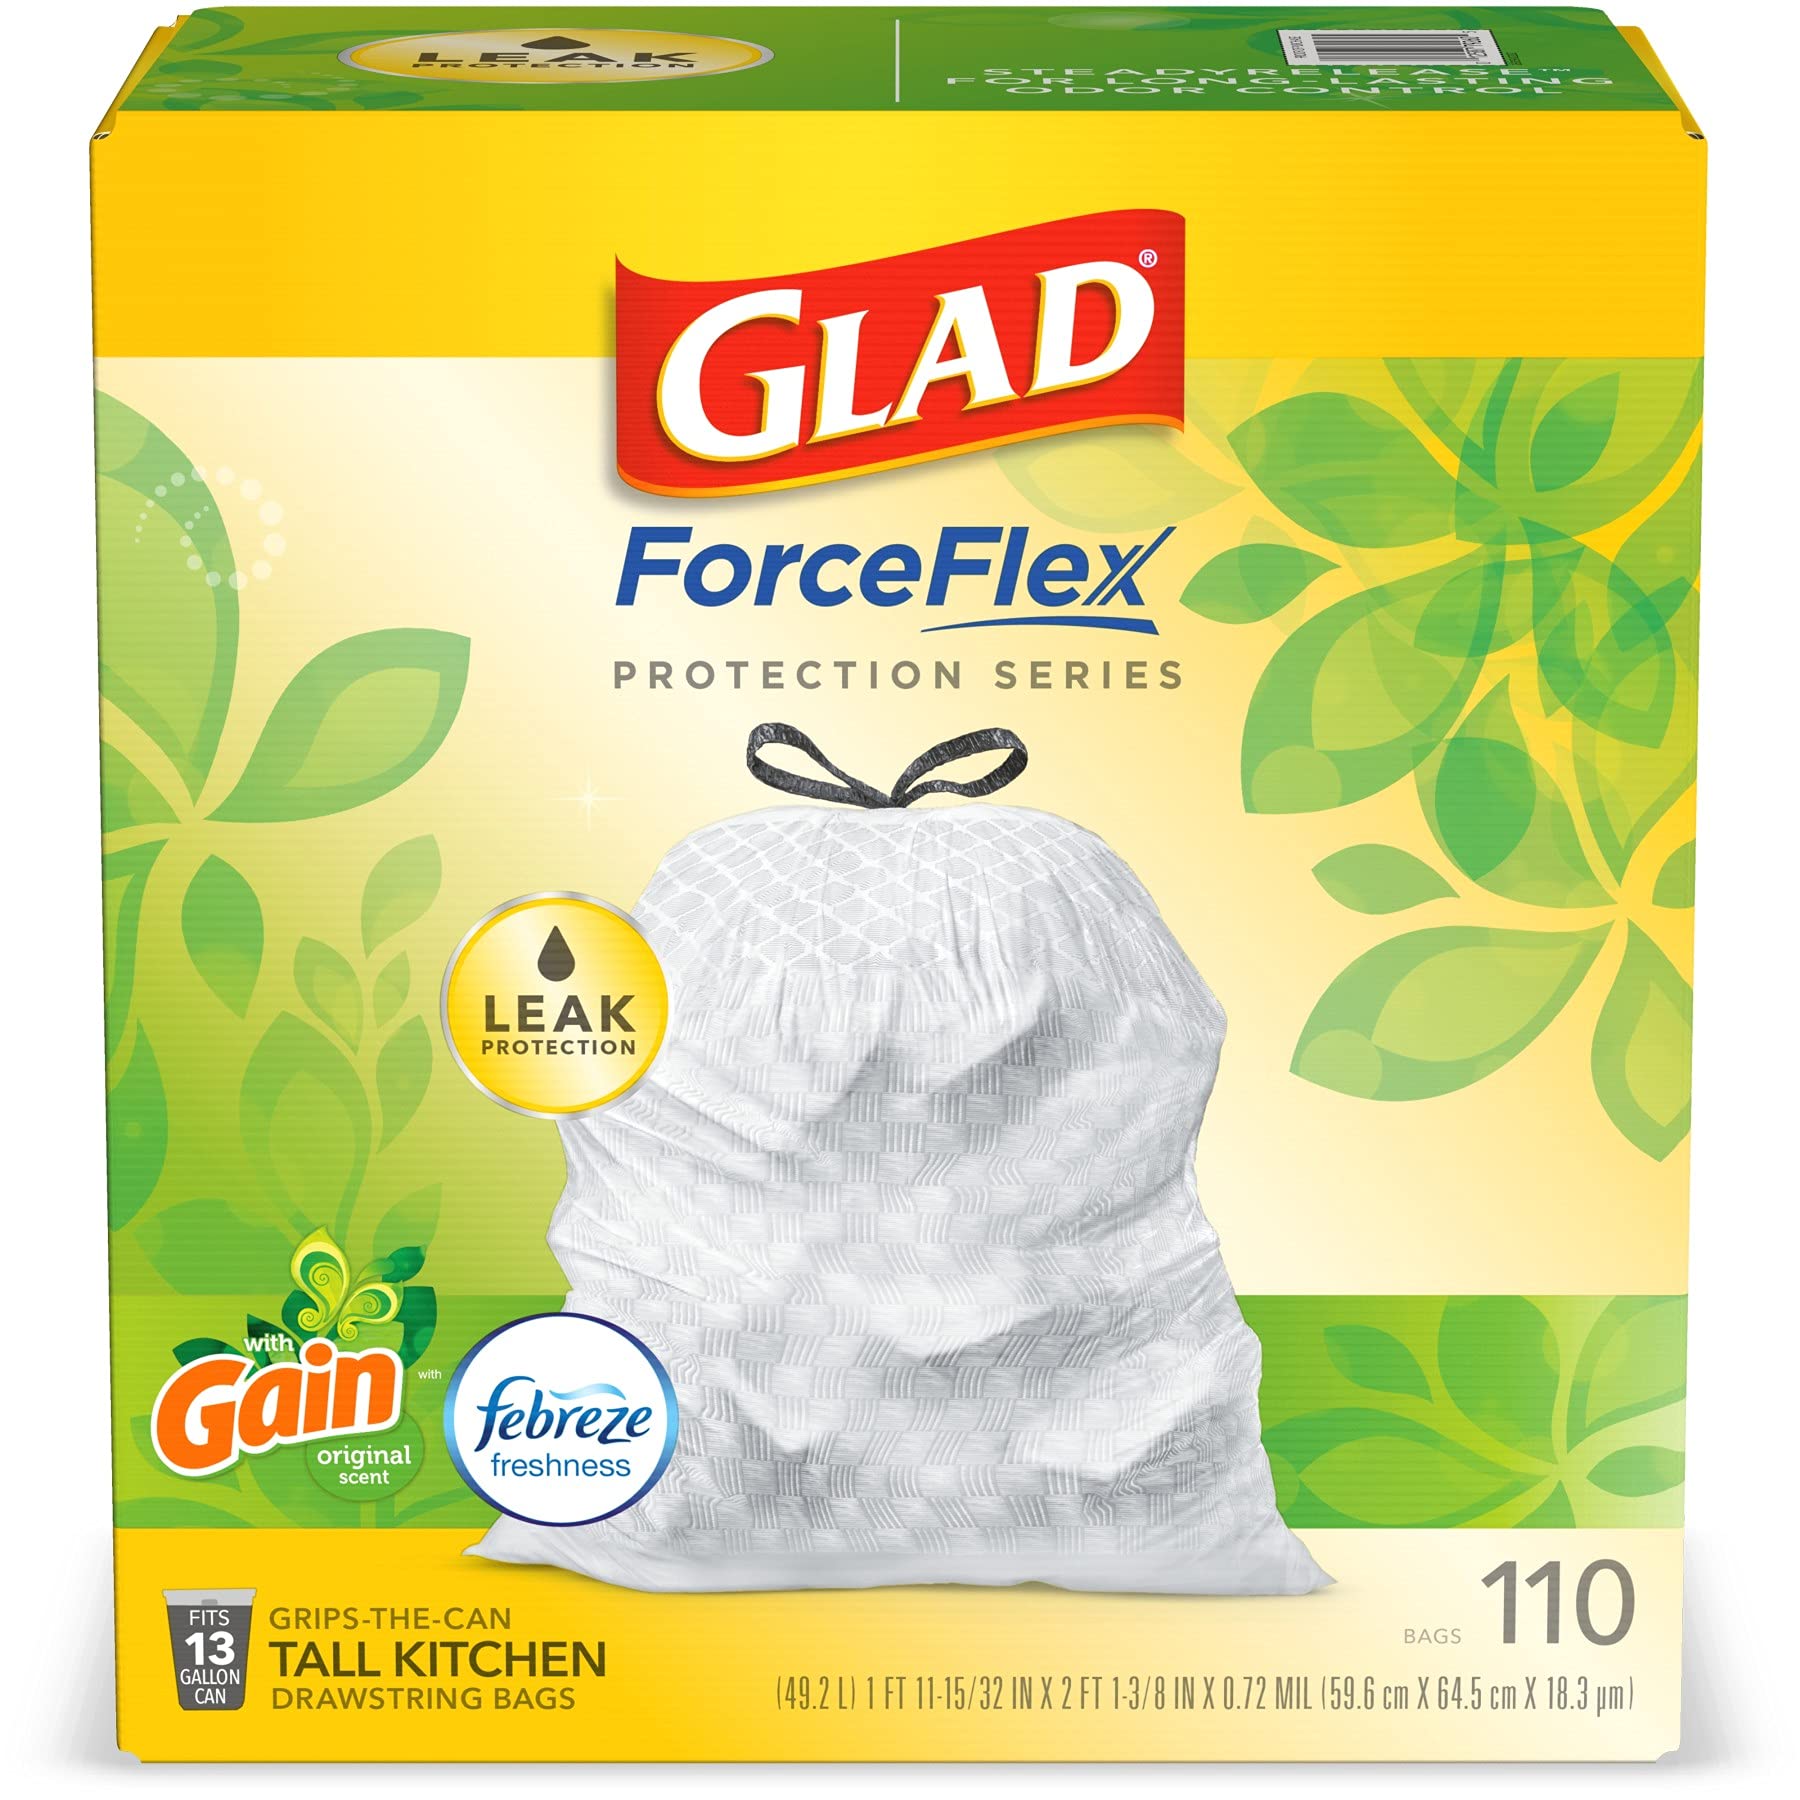 Glad Forceflex White Trash Bags Gain Moonlight Breeze Scent With